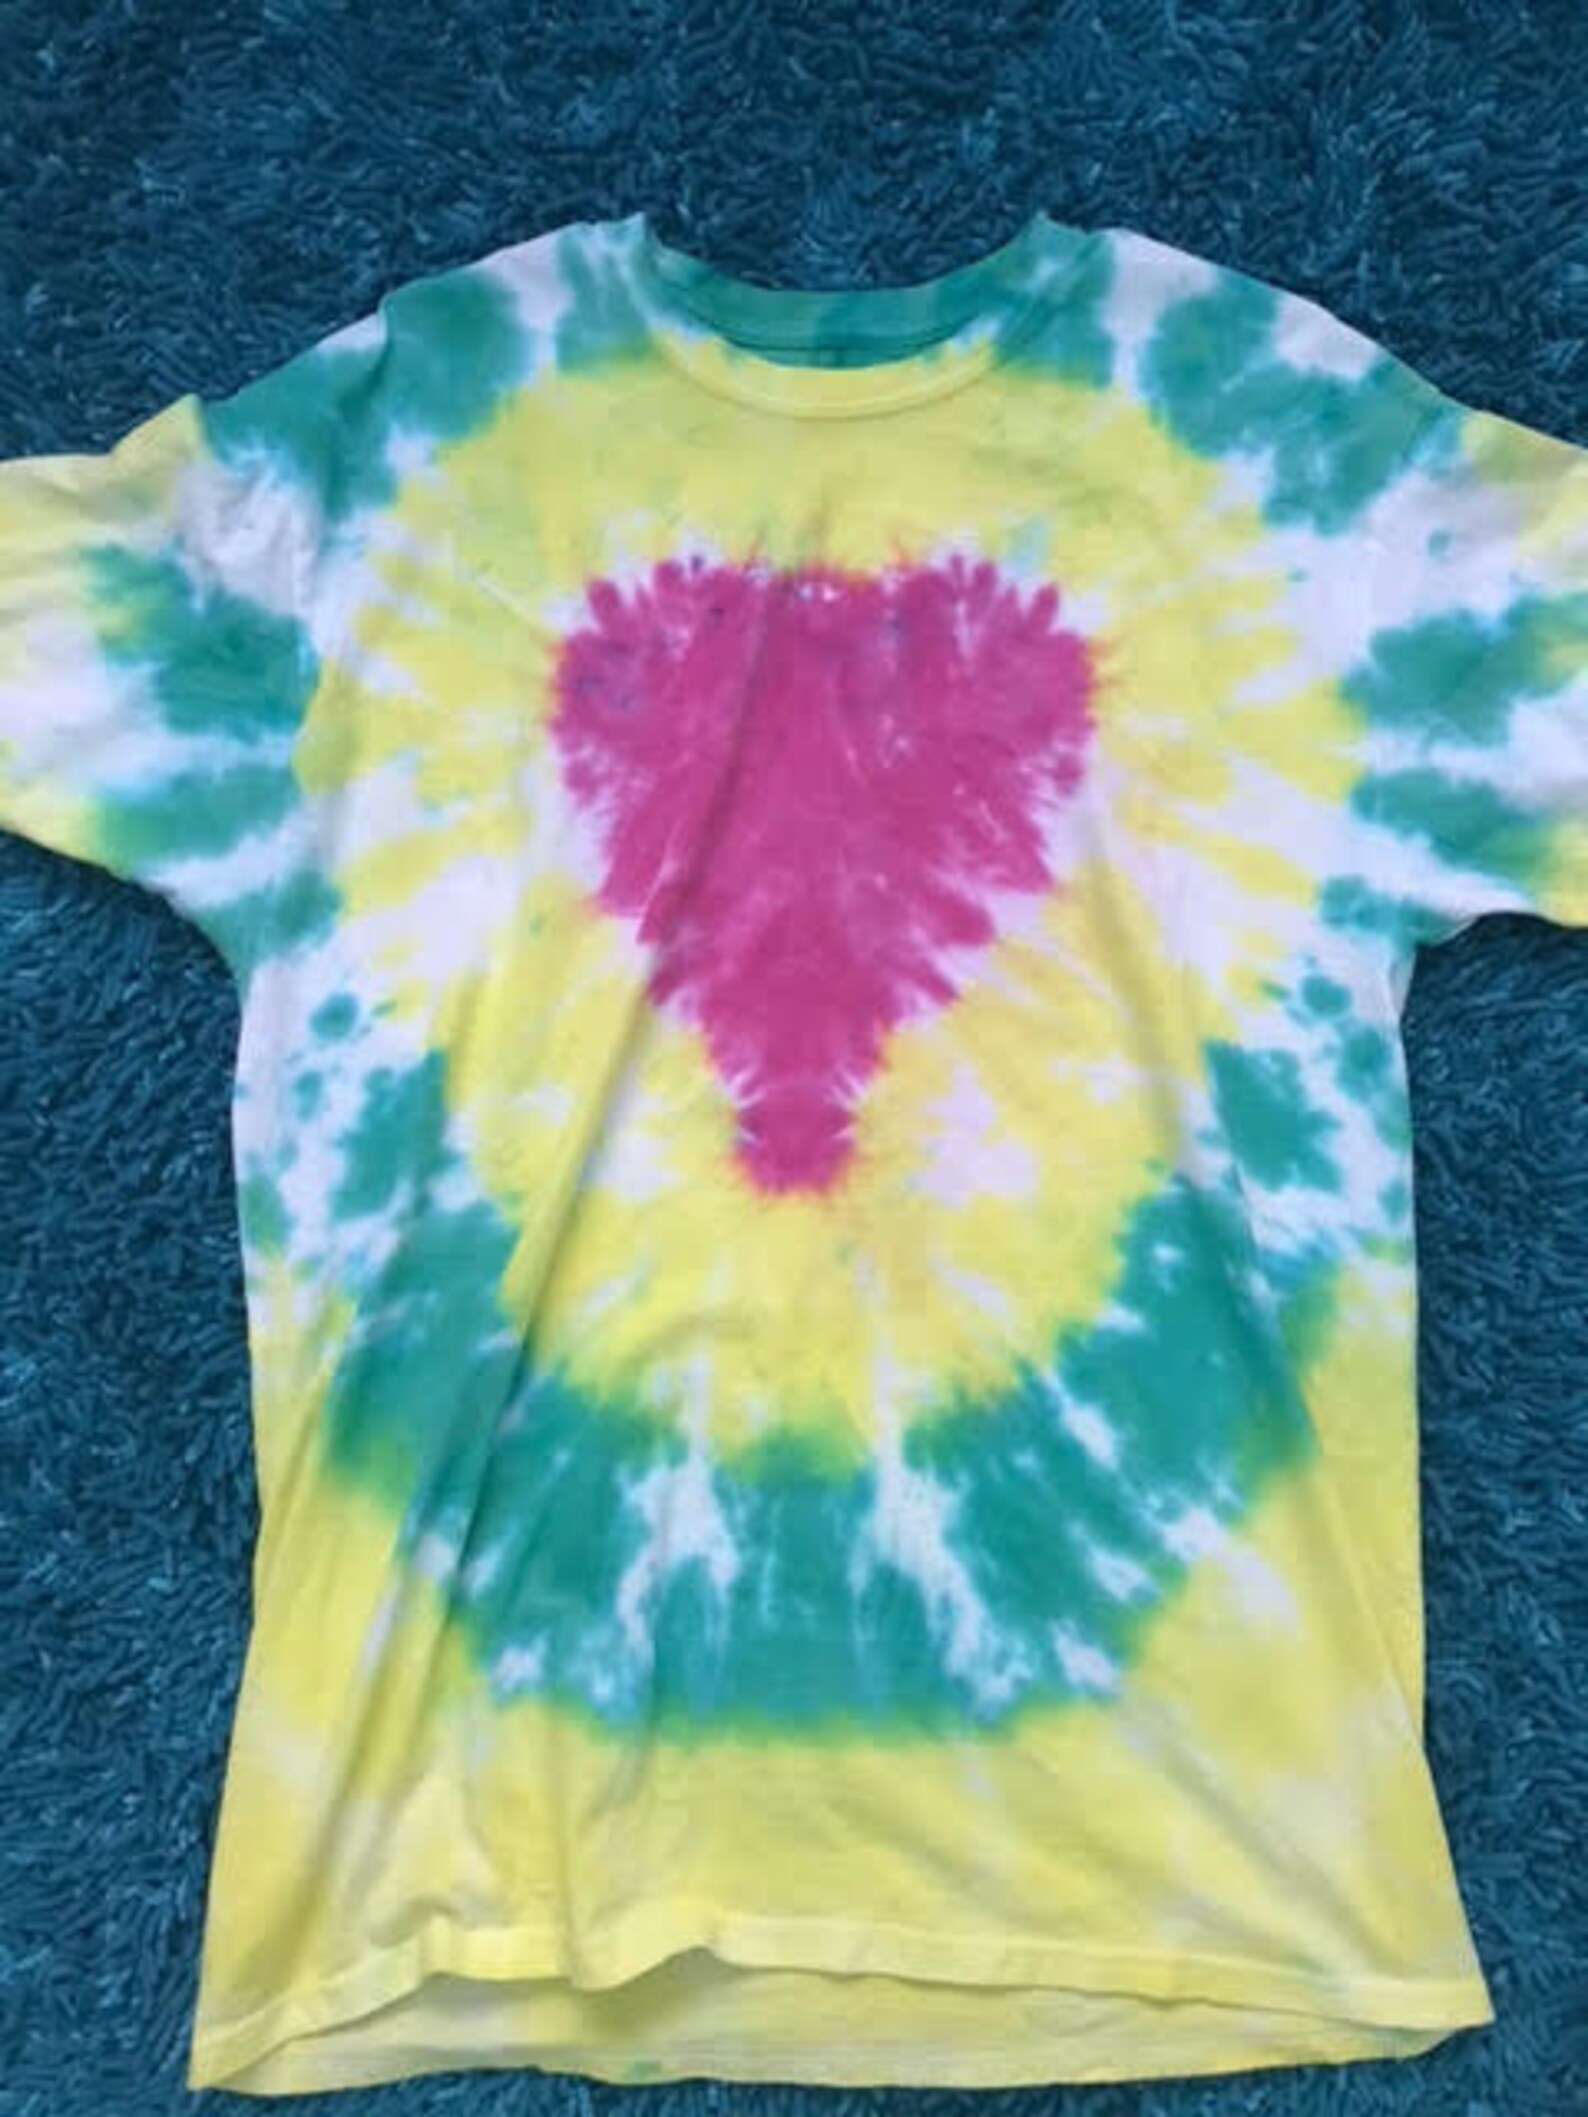 Unisex Tie Dye T-shirt Green and Yellow Spiral Pink Heart | Etsy